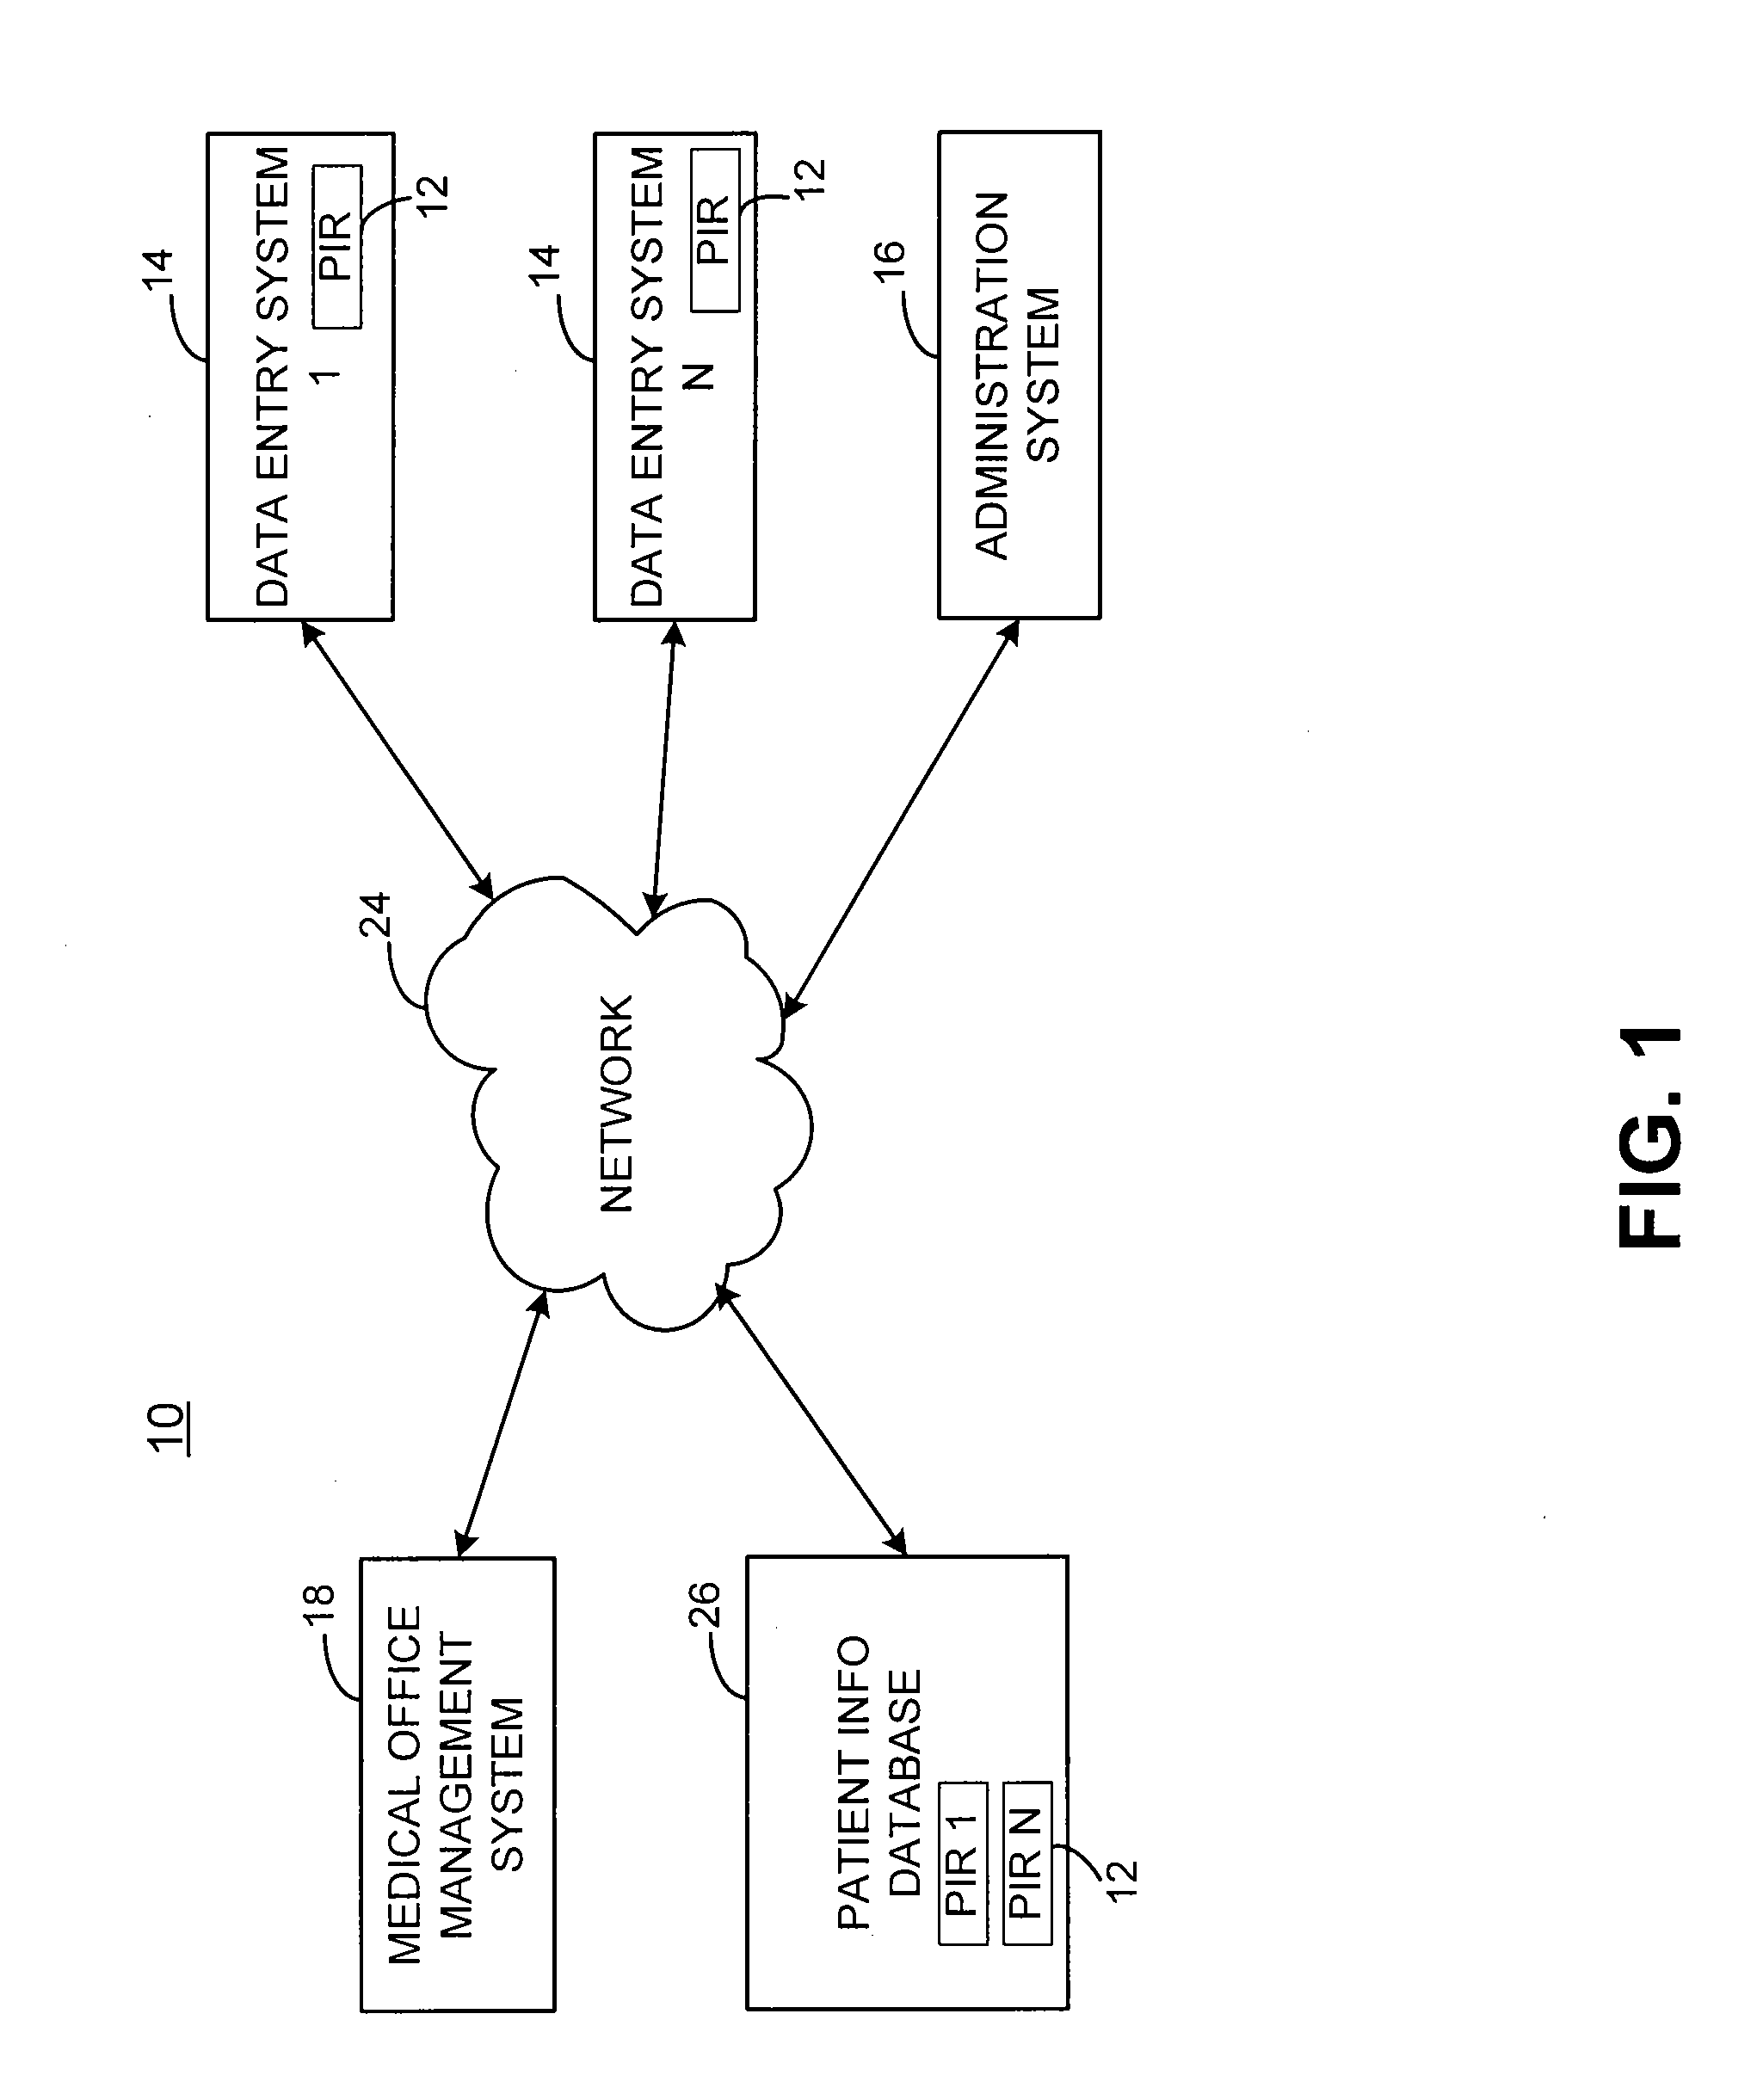 Methods and apparatus for a medical data entry system